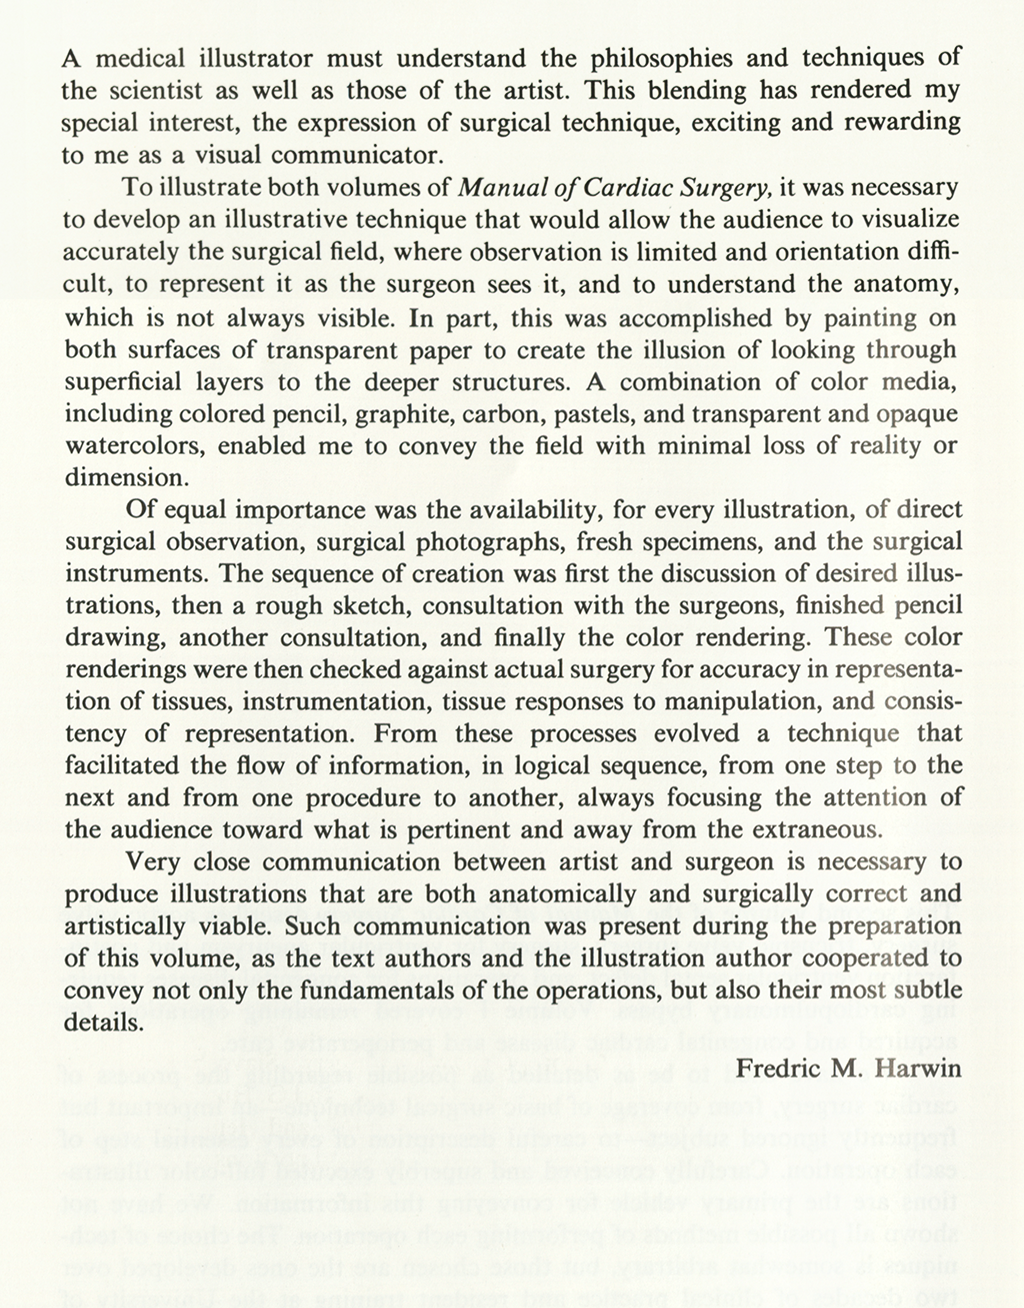 Preface for Manual of Cardiac Surgery, 1980: A medical illustrator must understand the philosophies and techniques of the scientist as well as those of the artist. This blending has rendered my special interest, the expression of surgical technique, exciting and rewarding to me as a visual communicator. To illustrate both volumes of Manual of Cardiac Surgery, it was necessary to develop an illustrative technique that would allow the audience to visualize accurately the surgical field, where observation is..